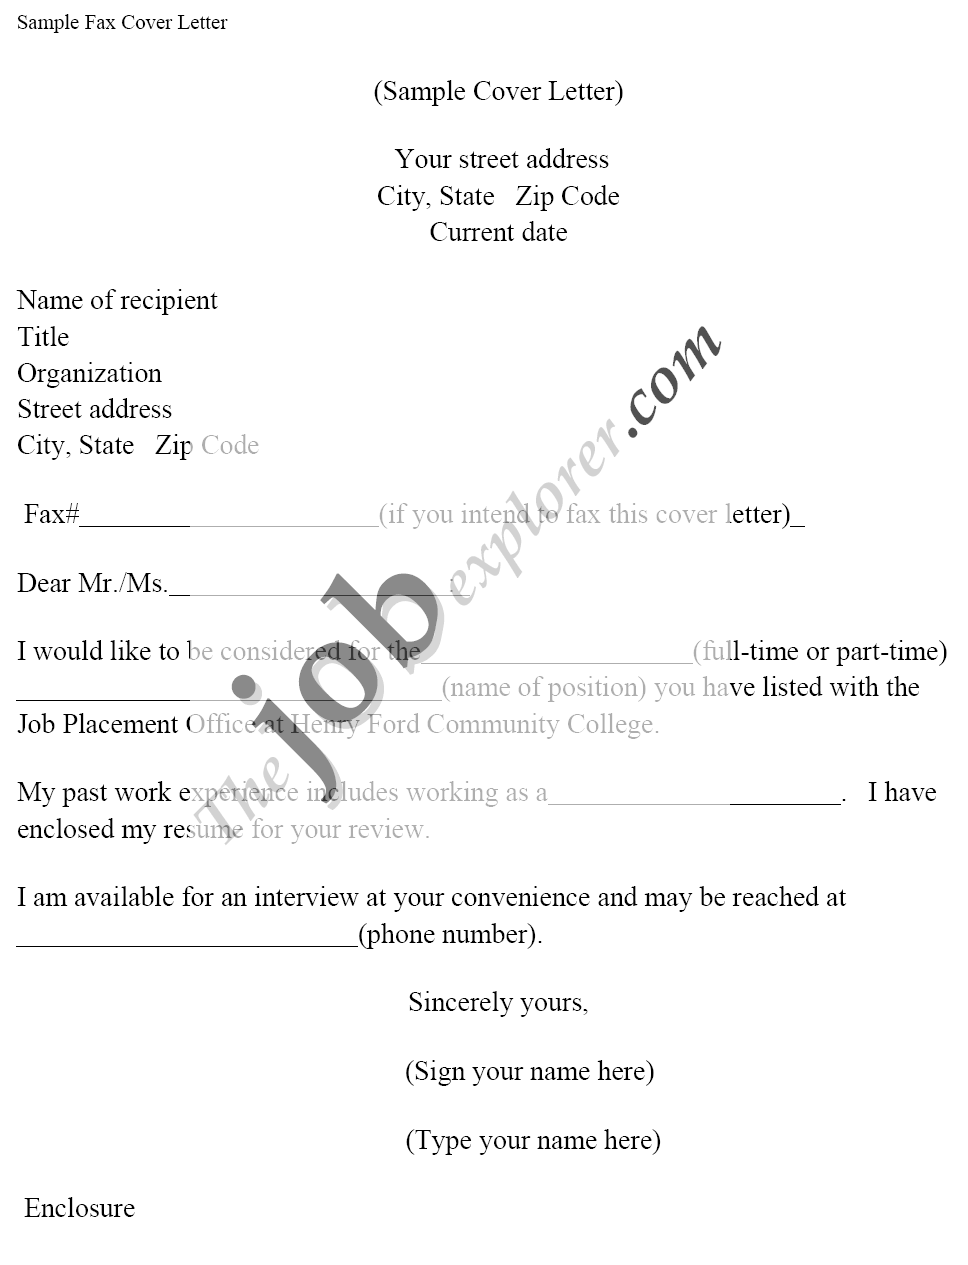 Sample Fax Cover Letters